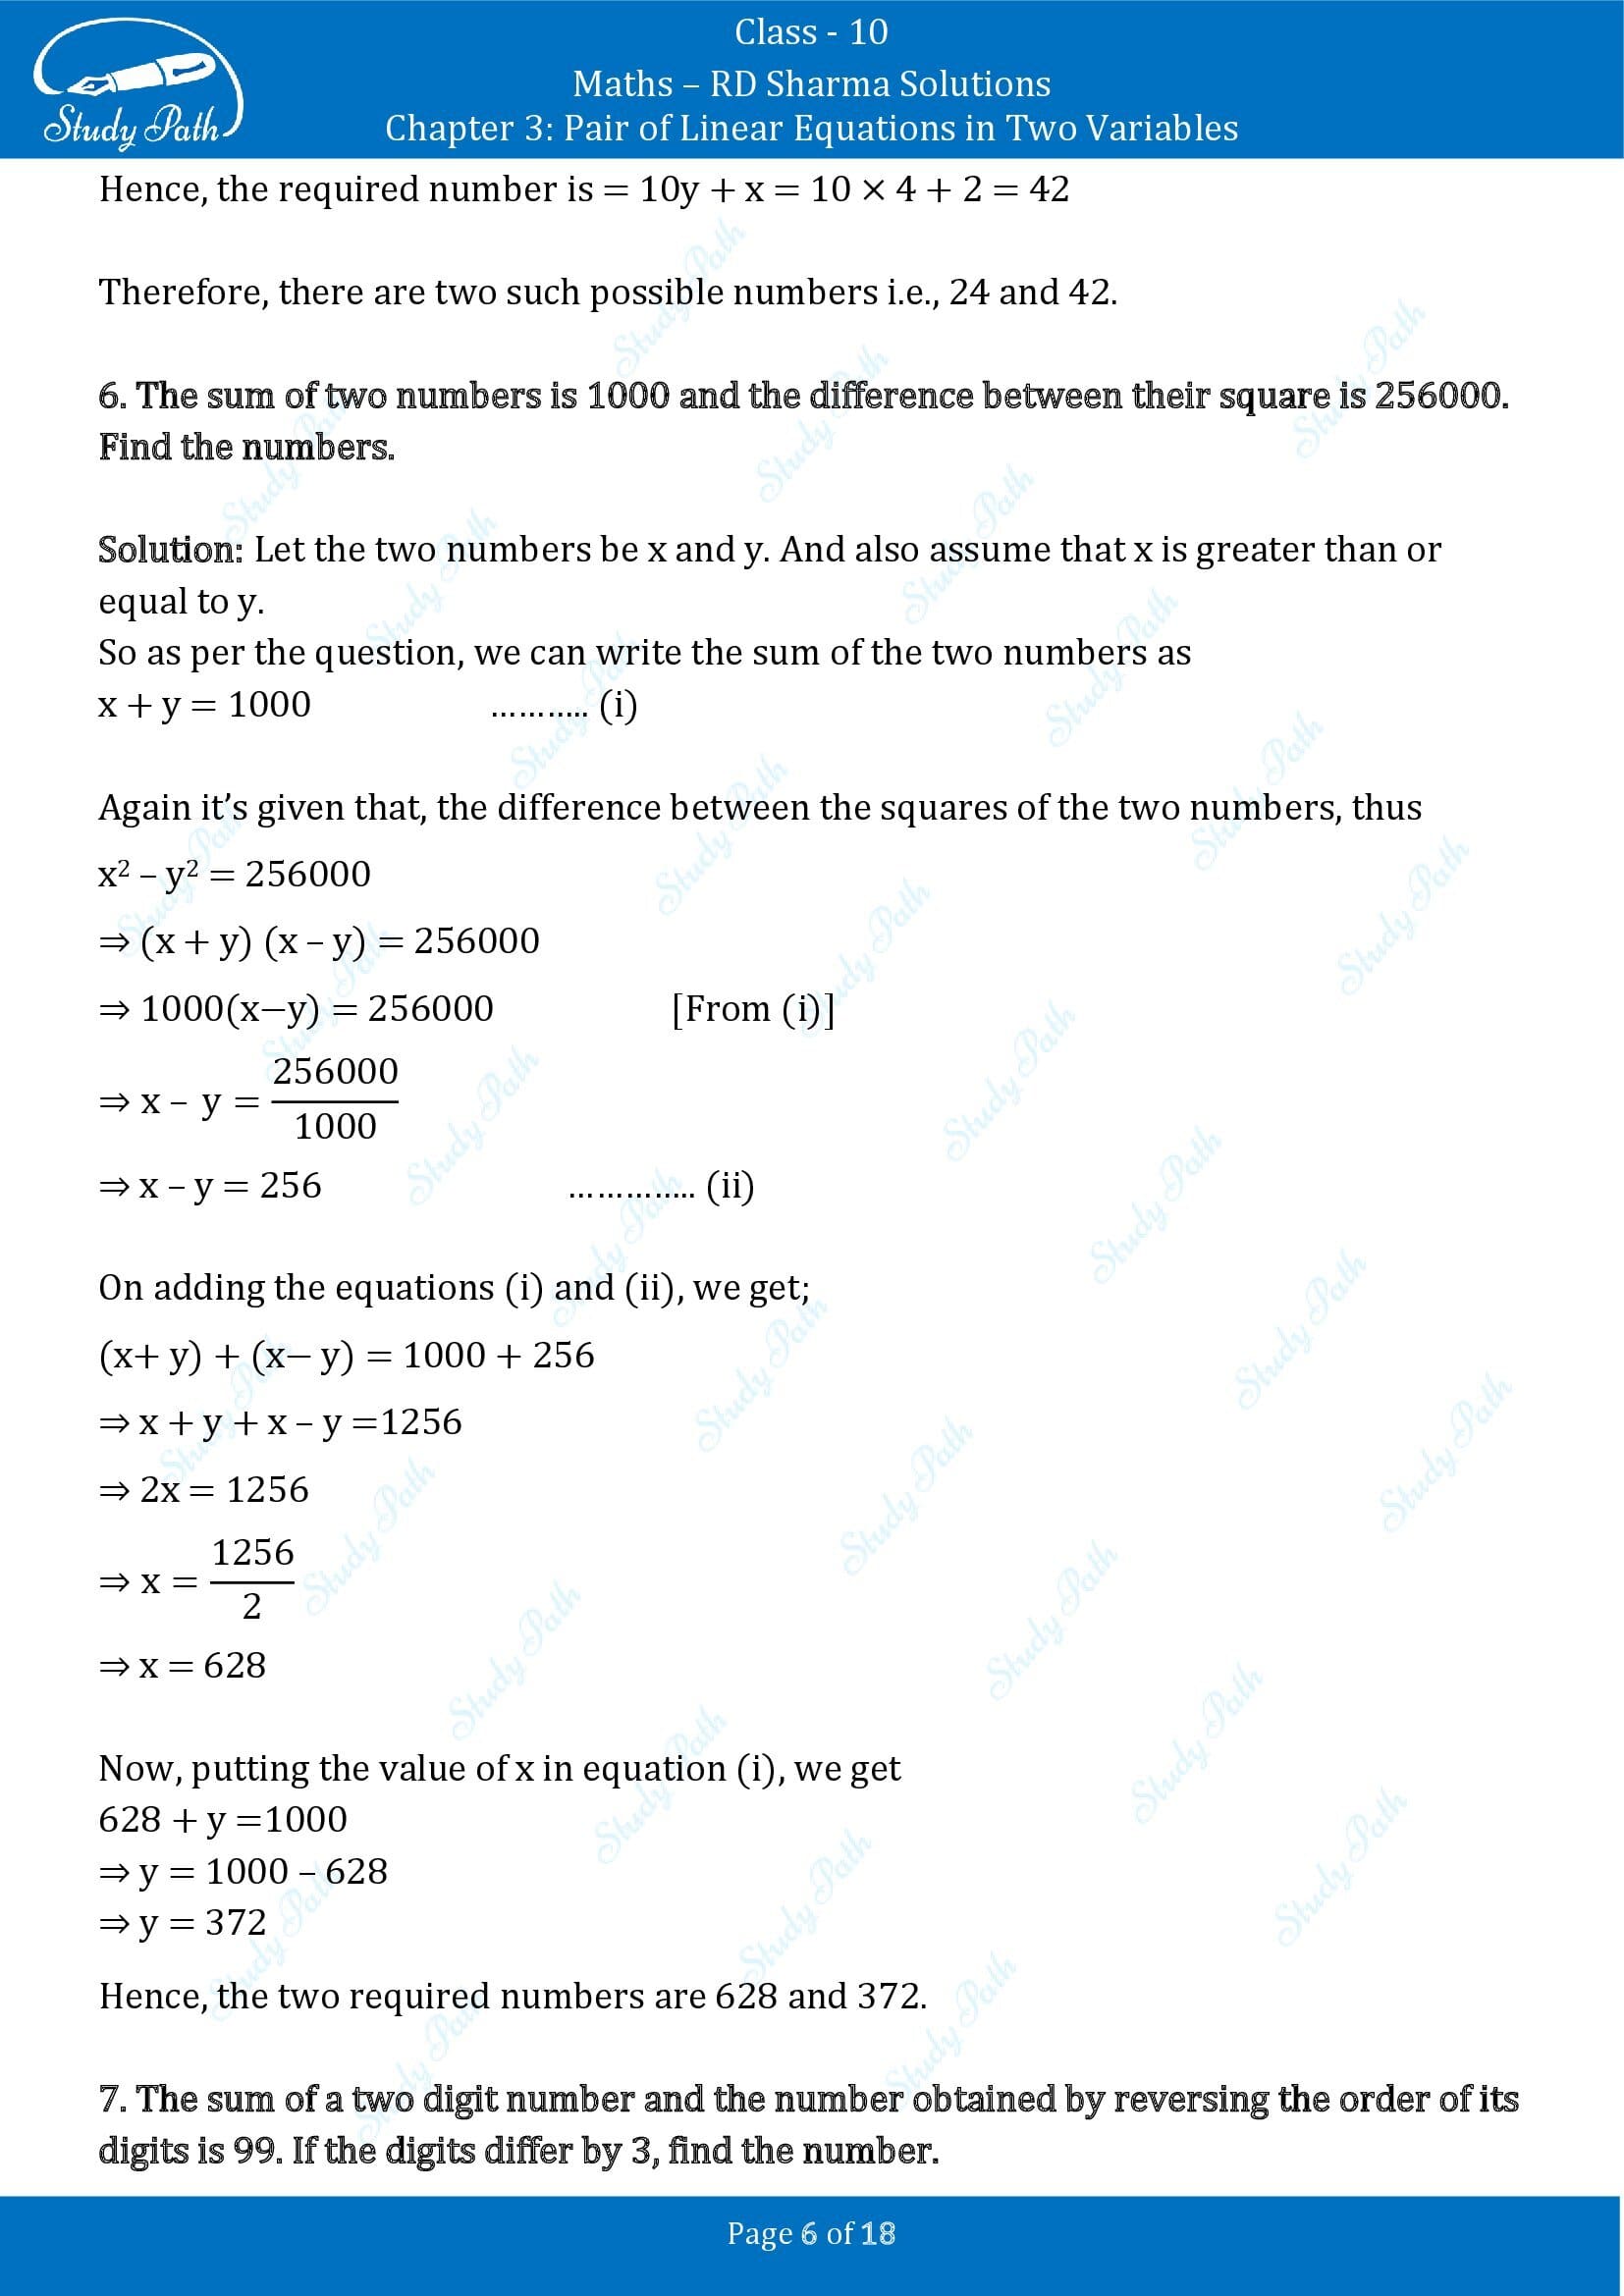 RD Sharma Solutions Class 10 Chapter 3 Pair of Linear Equations in Two Variables Exercise 3.7 00006